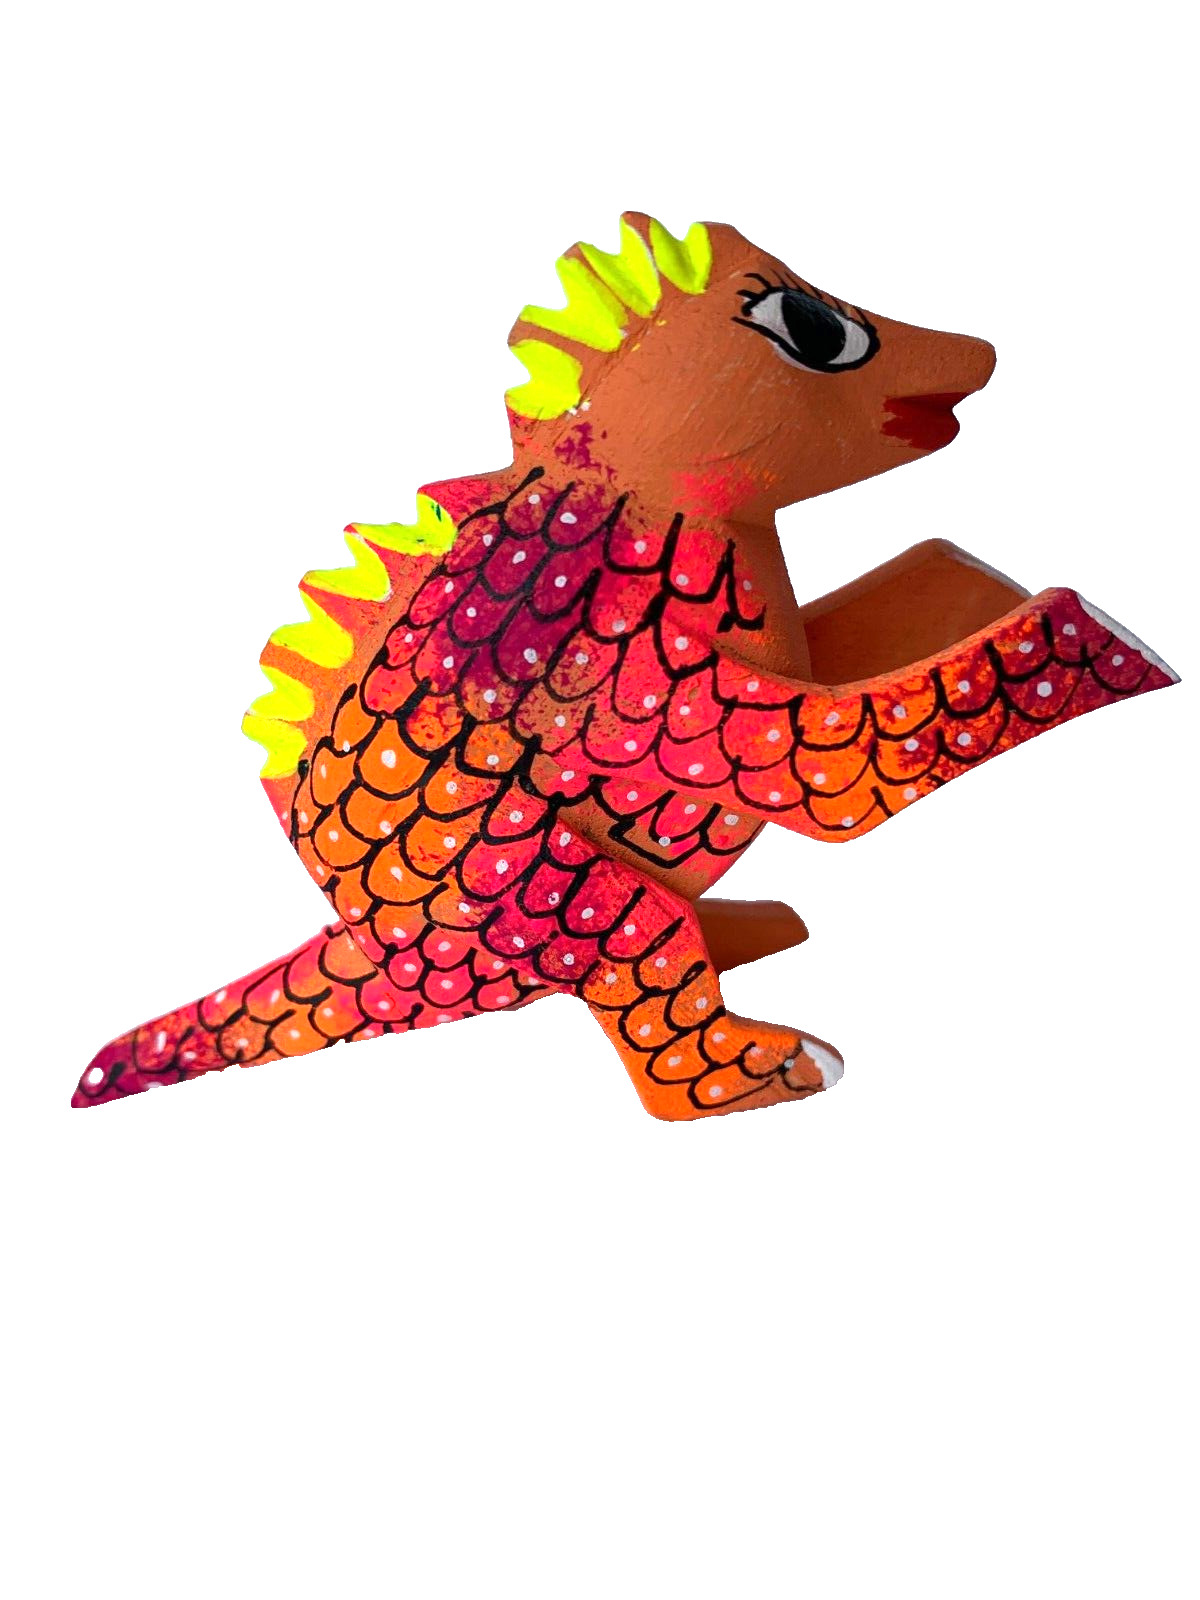 LITTLE DINOSAUR ALEBRIJE-  HAND CRAFTED WOOD CARVING OAXACA, MEXICO